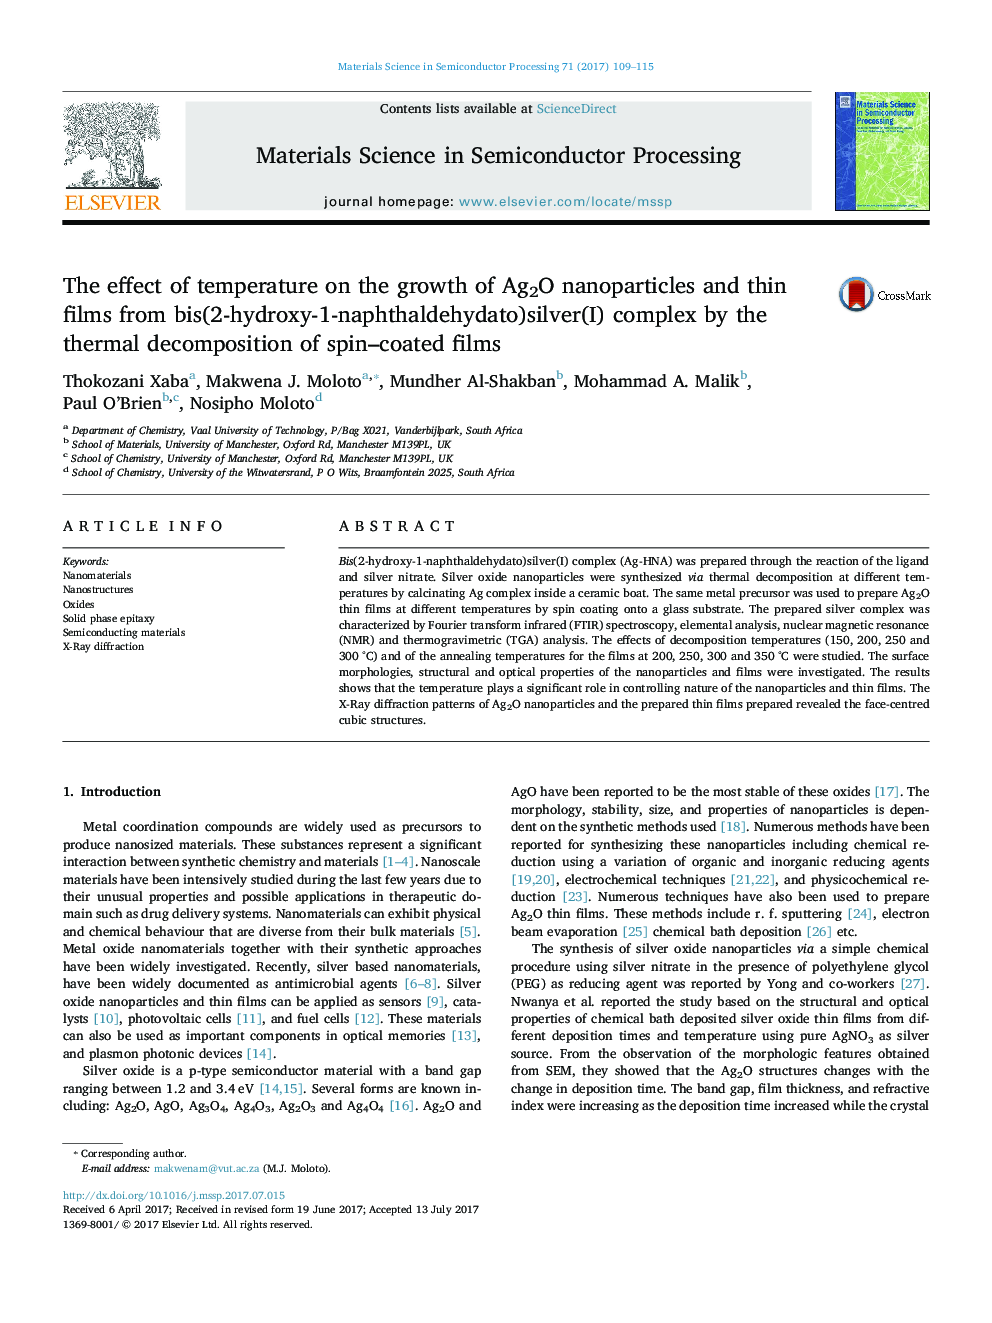 The effect of temperature on the growth of Ag2O nanoparticles and thin films from bis(2-hydroxy-1-naphthaldehydato)silver(I) complex by the thermal decomposition of spin-coated films